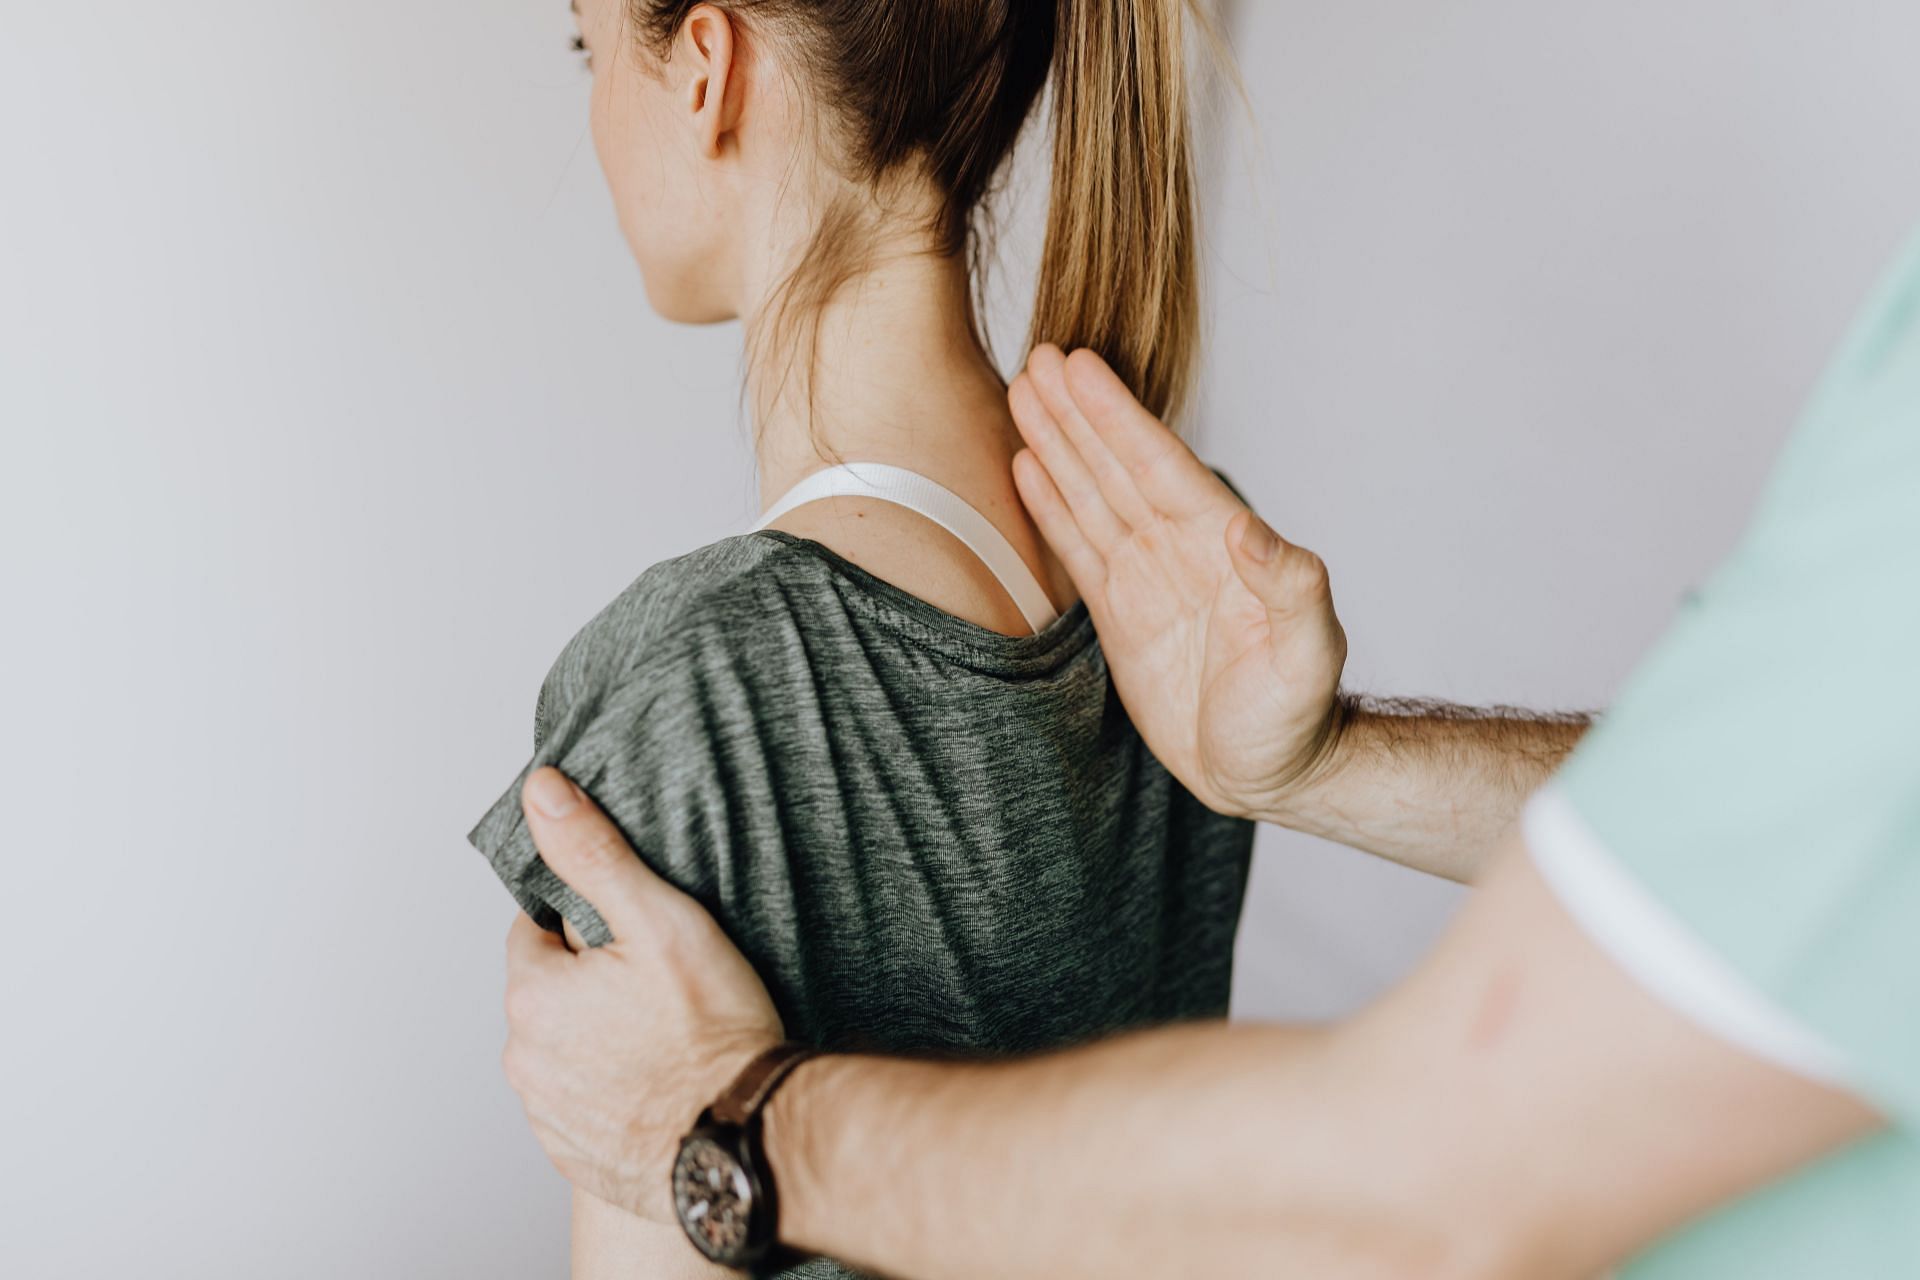 Lower back strengthening exercises can help relieve and prevent spine related discomfort (Image via Pexels/Karolina Grabowski)